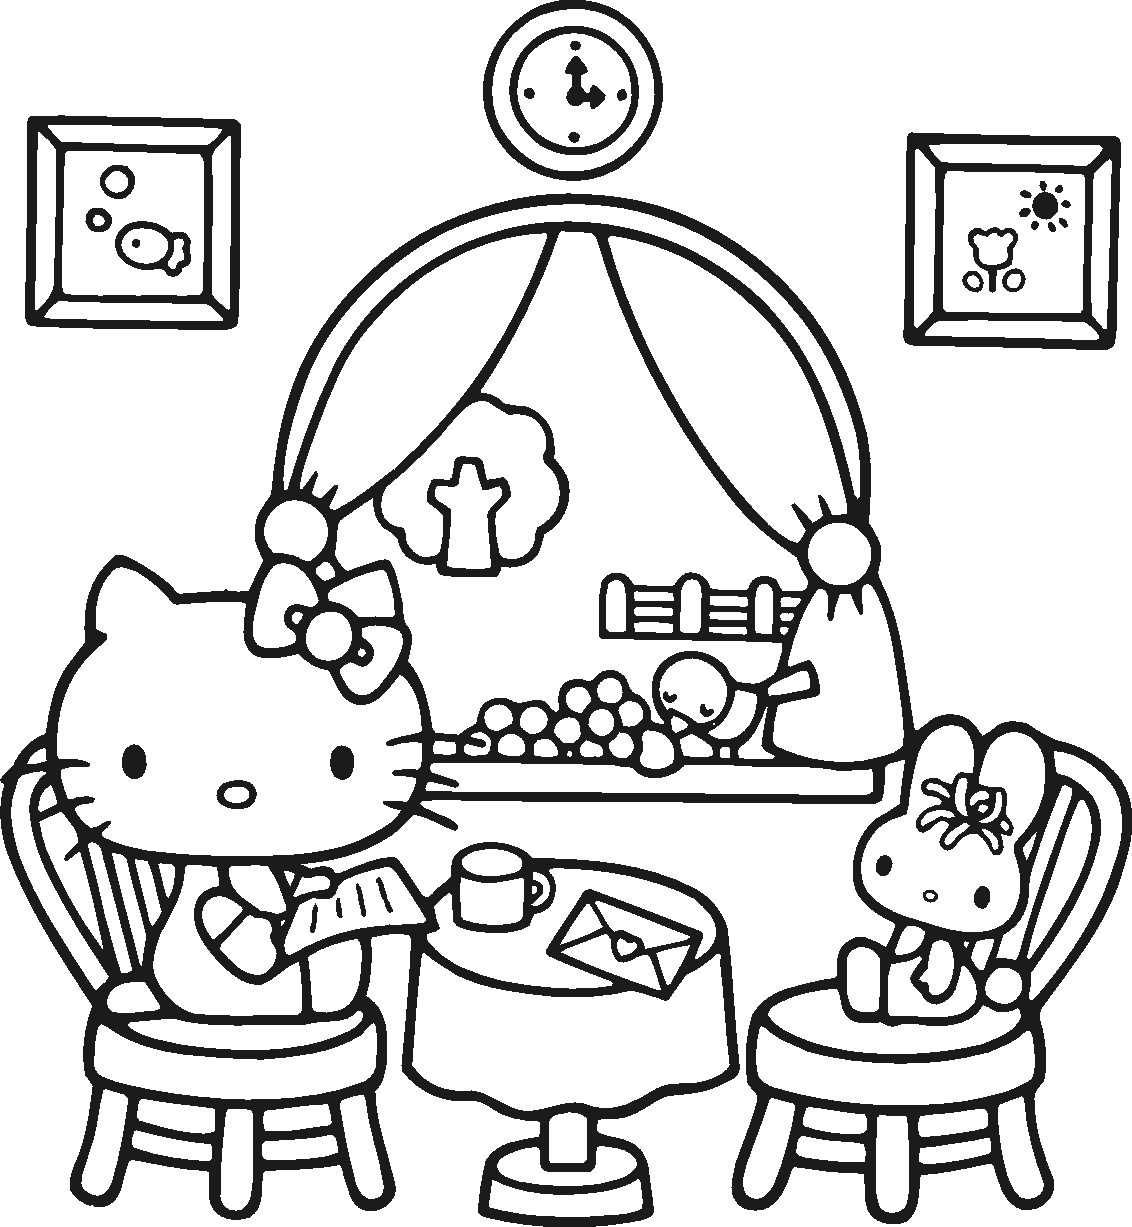 Download Hello Kitty Coloring Pages - Lets coloring!